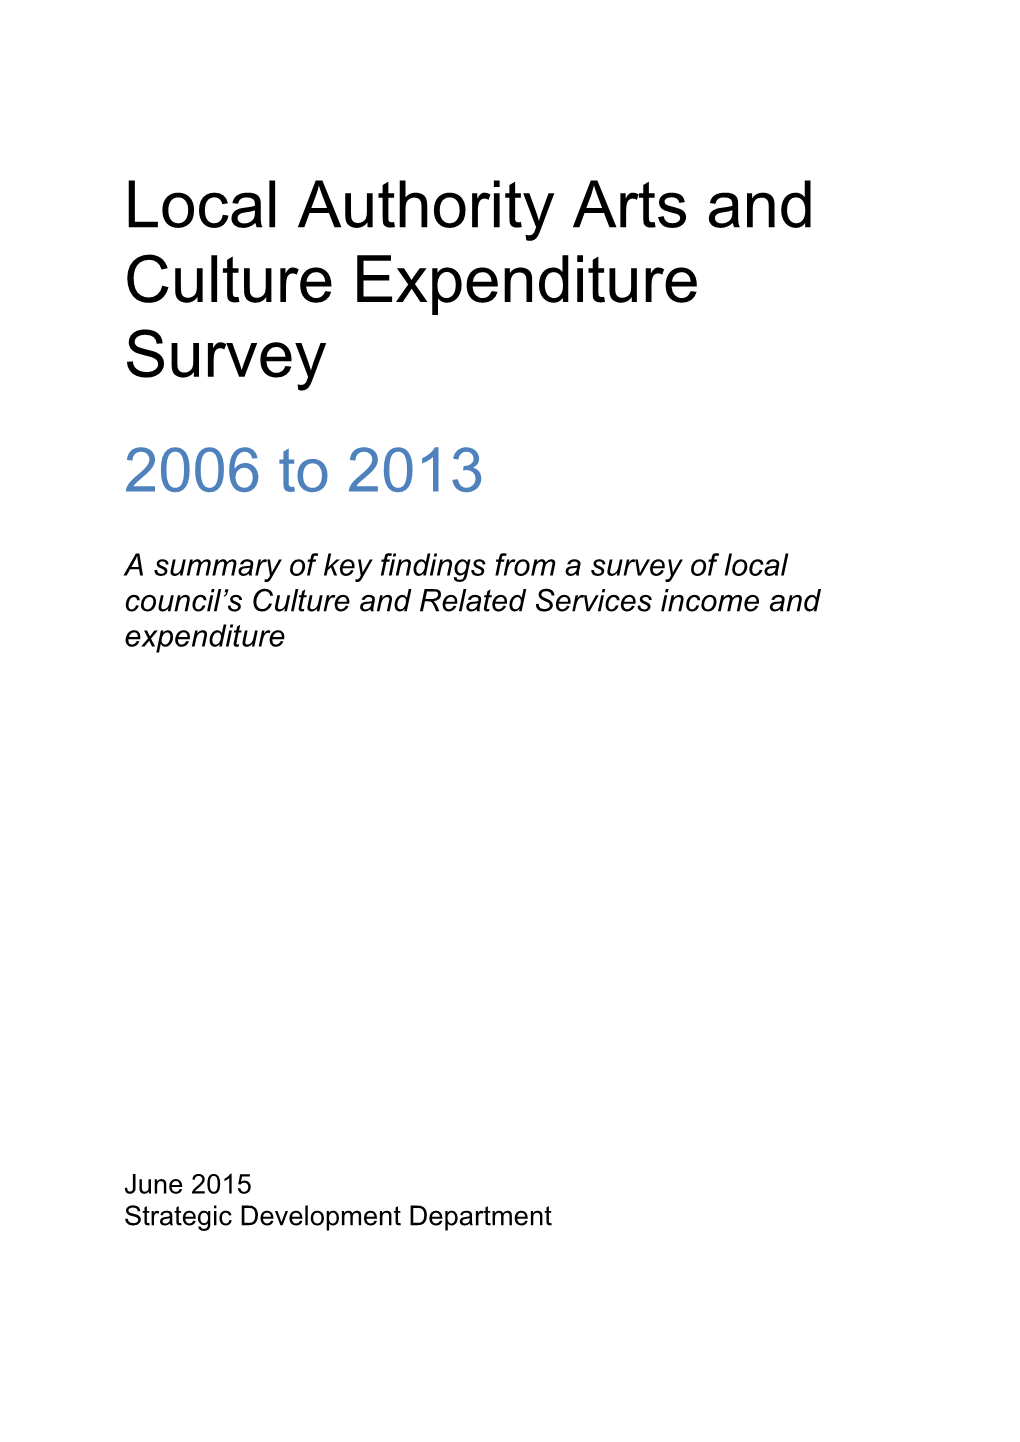 Download the Local Authority Arts and Culture Expenditure Survey 2006